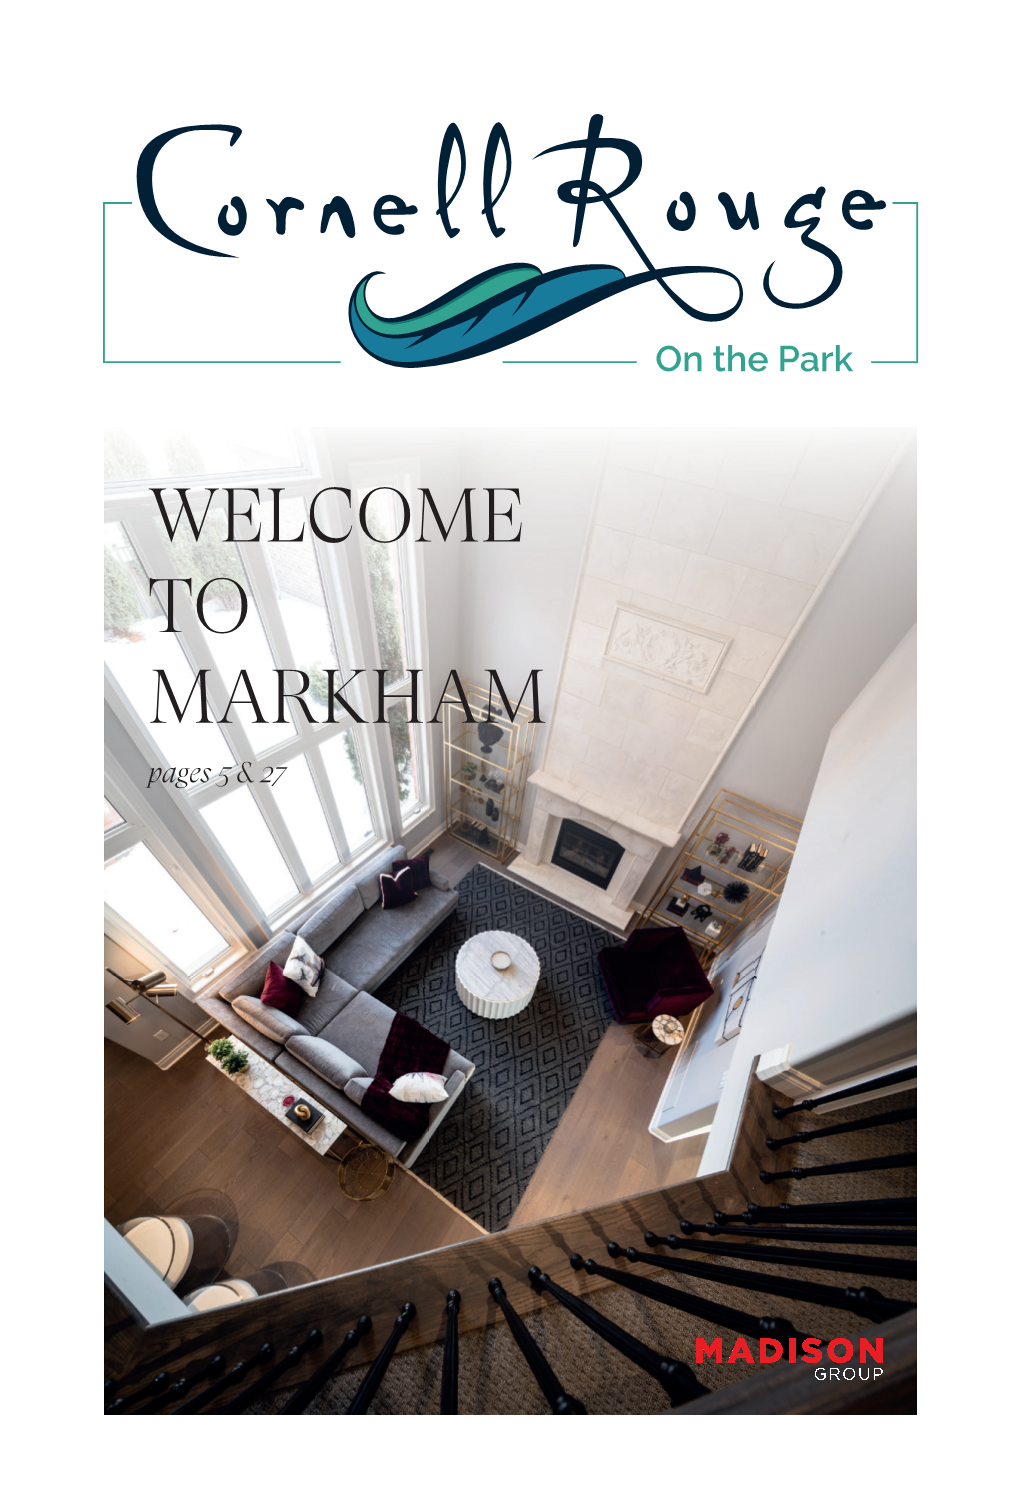 WELCOME to MARKHAM Pages 5 & 27 5 WELCOME to MARKHAM’S CORNELL ROUGE